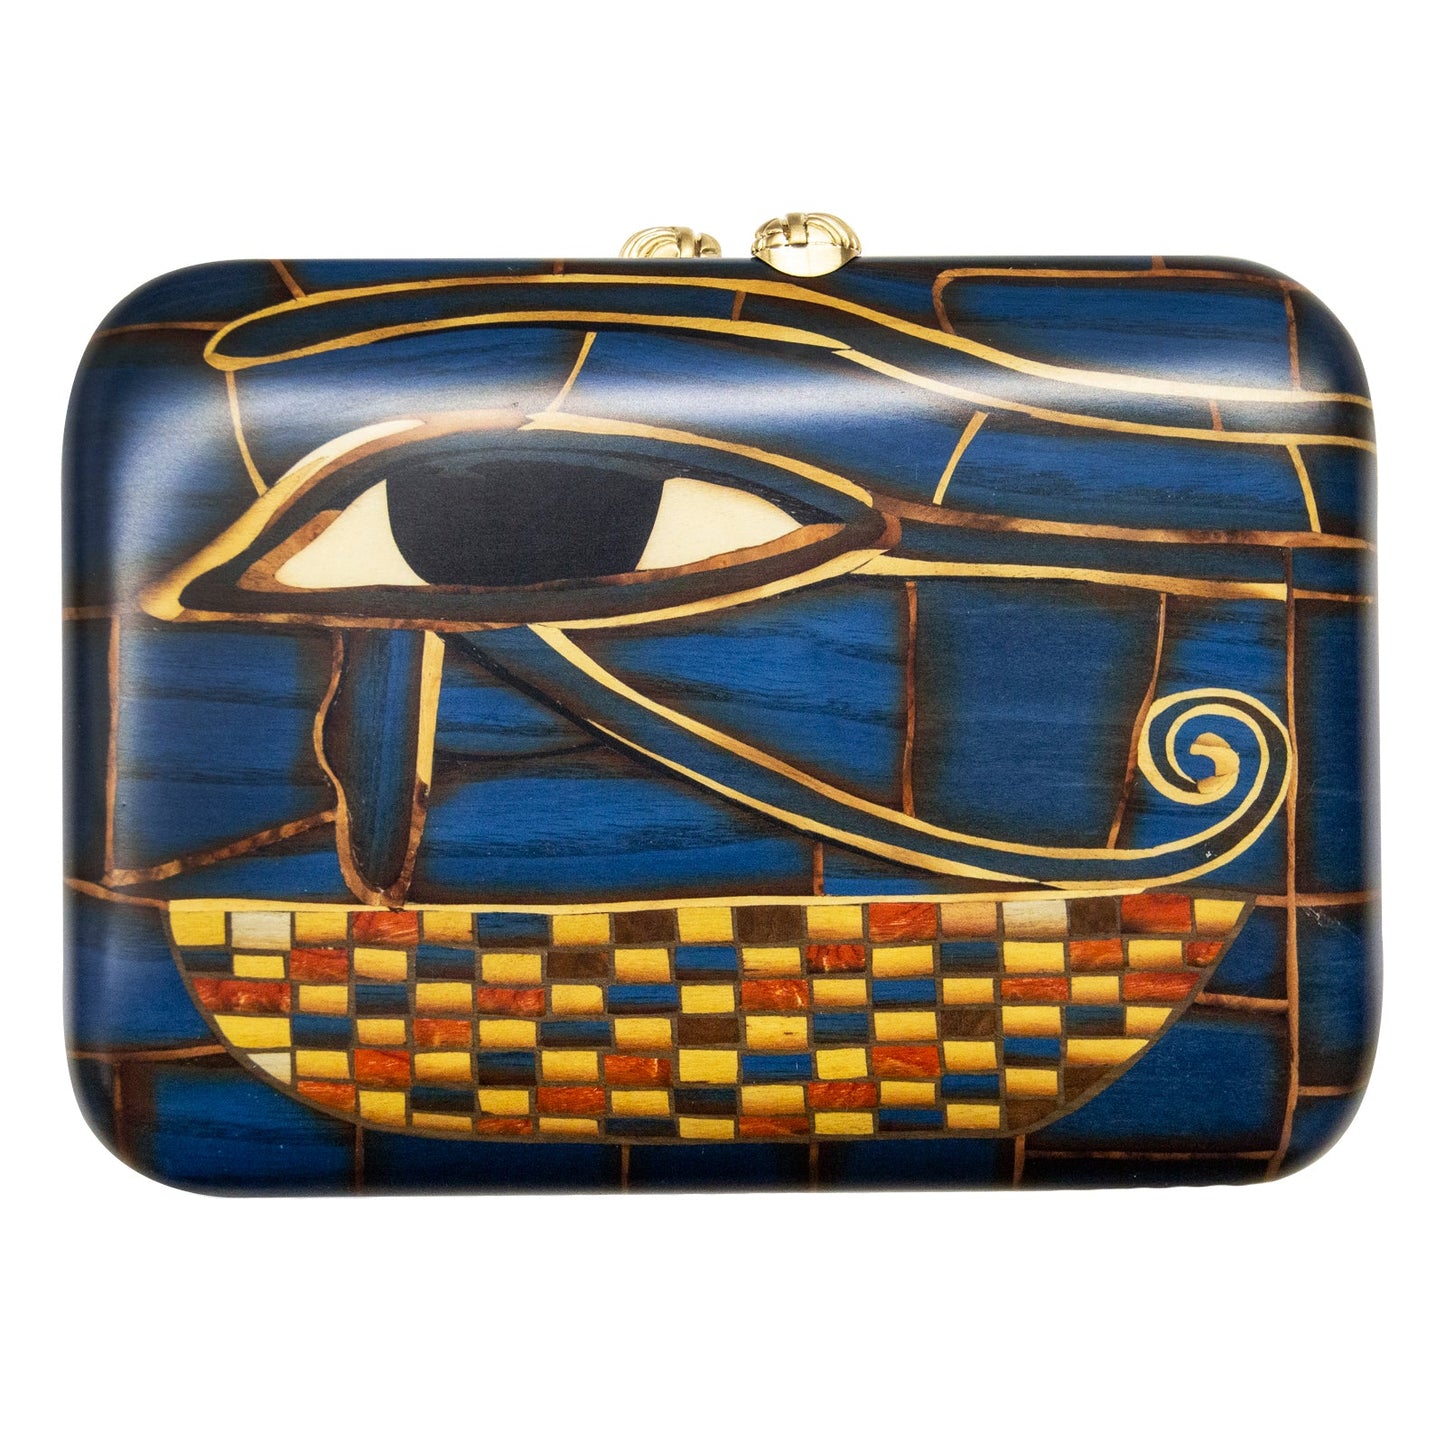 Silvia Furmanovich - Hand-Painted Marquetry Eye of Horus Clutch